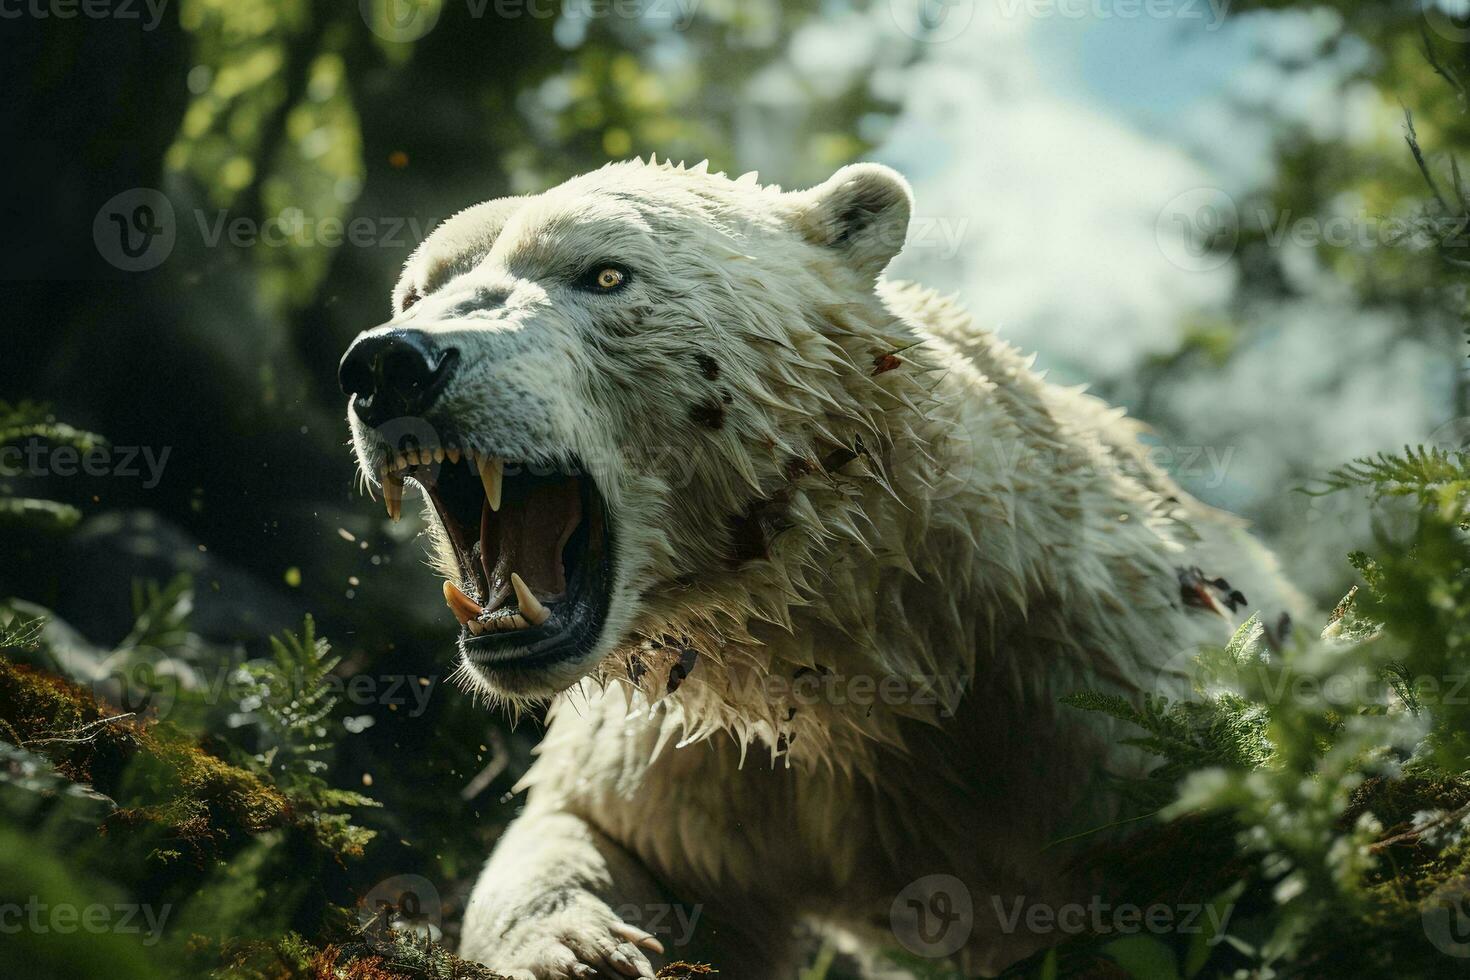 AI generated a fierce polar bear amidst lush greenery with a sunlit backdrop. The bear open mouth suggests it is roaring or growling. photo